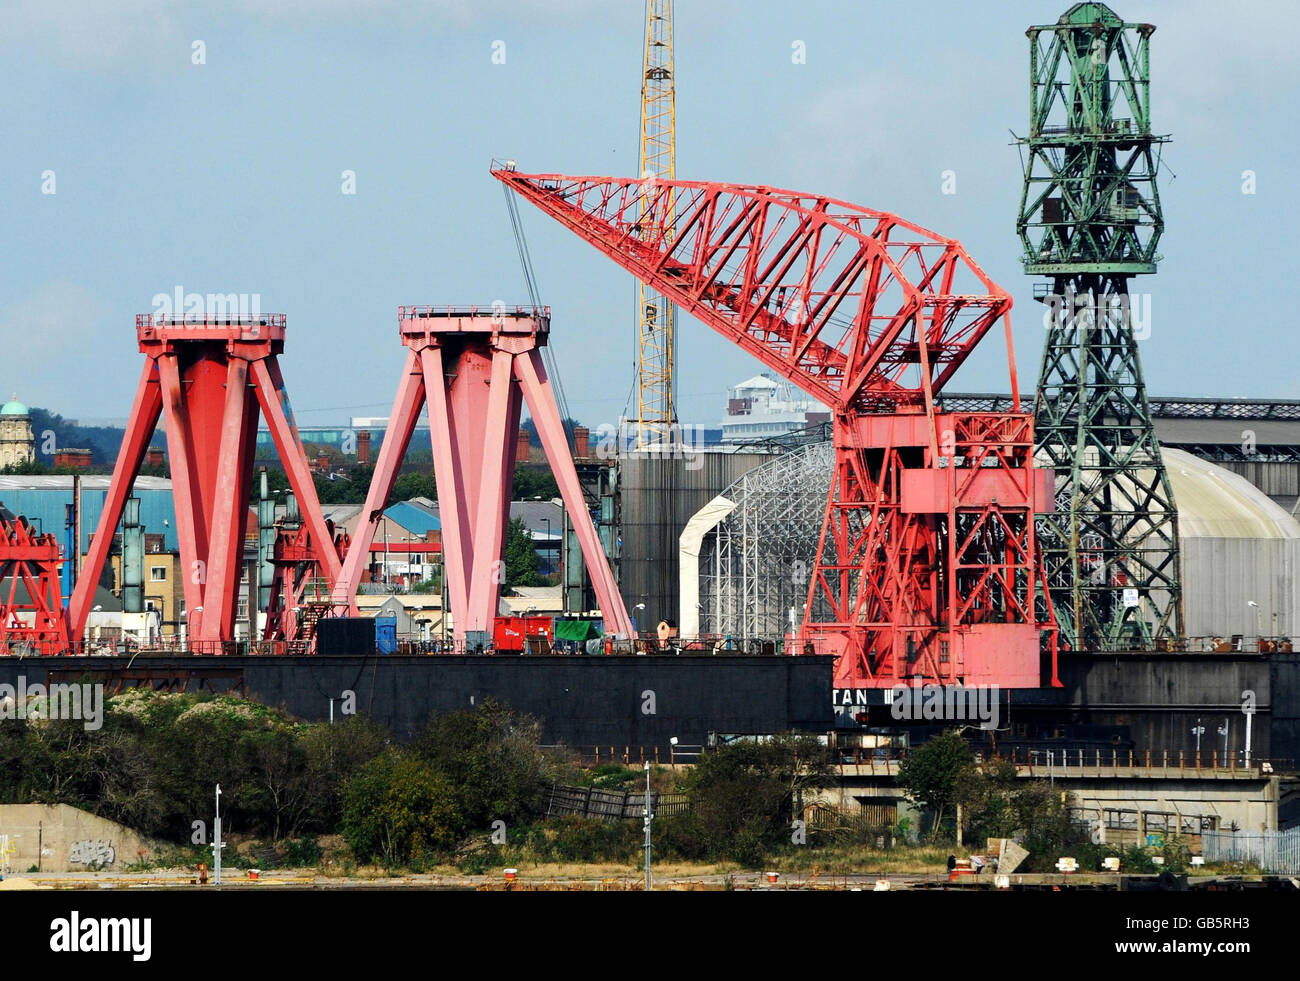 The Swan Hunter shipyard on the River Tyne. The cranes are slowly being dismantled at the dormant shipyard once famous for employing over 1000 workers on the River Tyne. Stock Photo